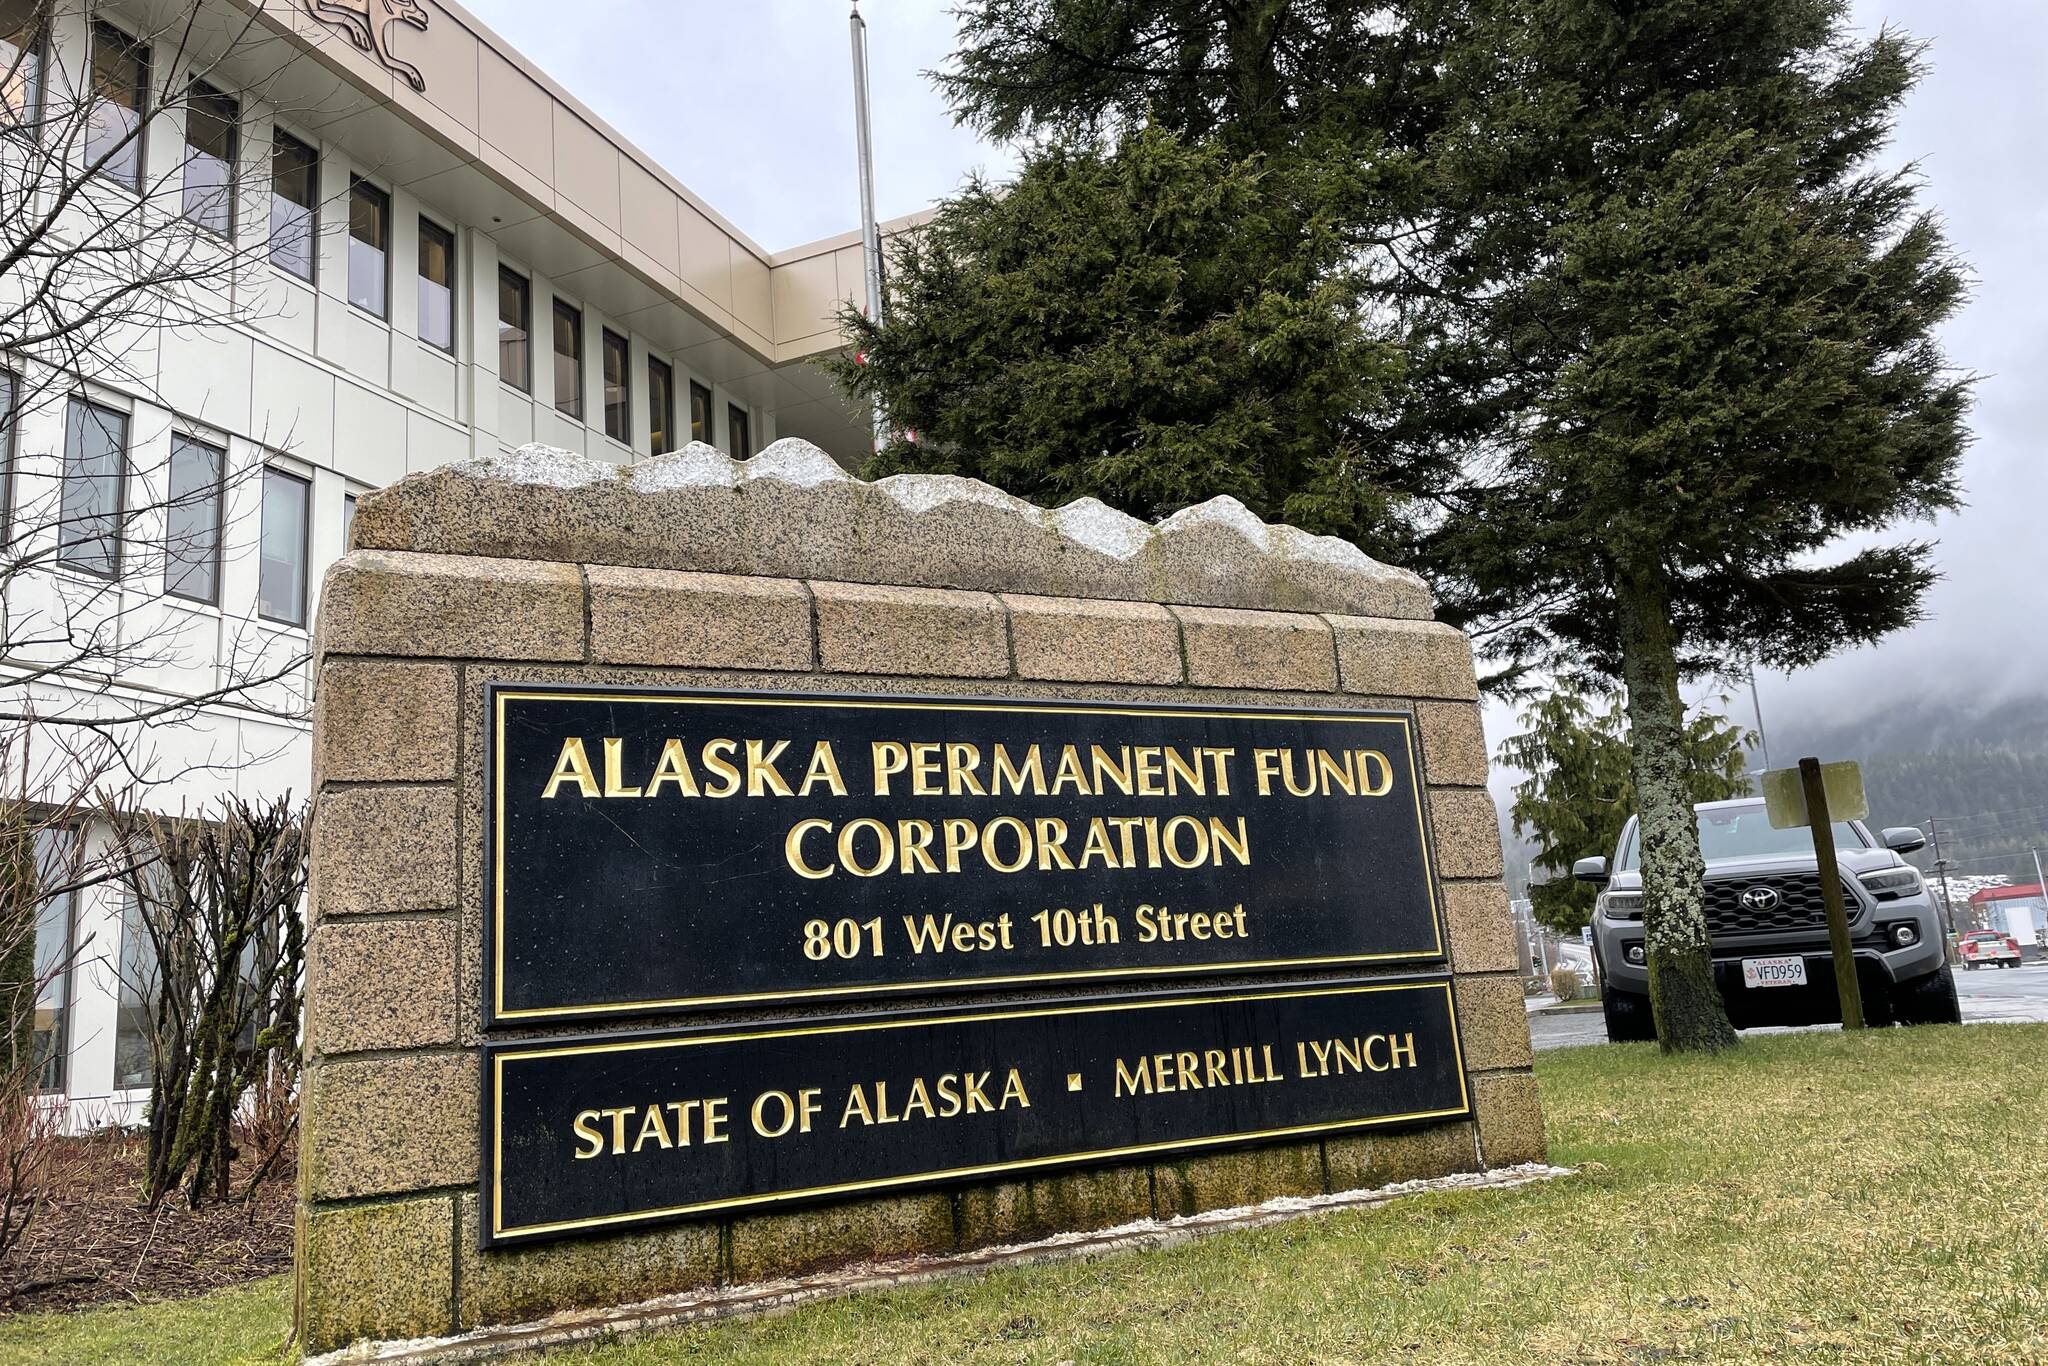 The deadline for the Alaska Permanent Fund Dividend, which comes from the fund managed by the Alaska Permanent Fund Corporation, is coming up fast, landing on March 31, 2023. (Michael S. Lockett / Juneau Empire)